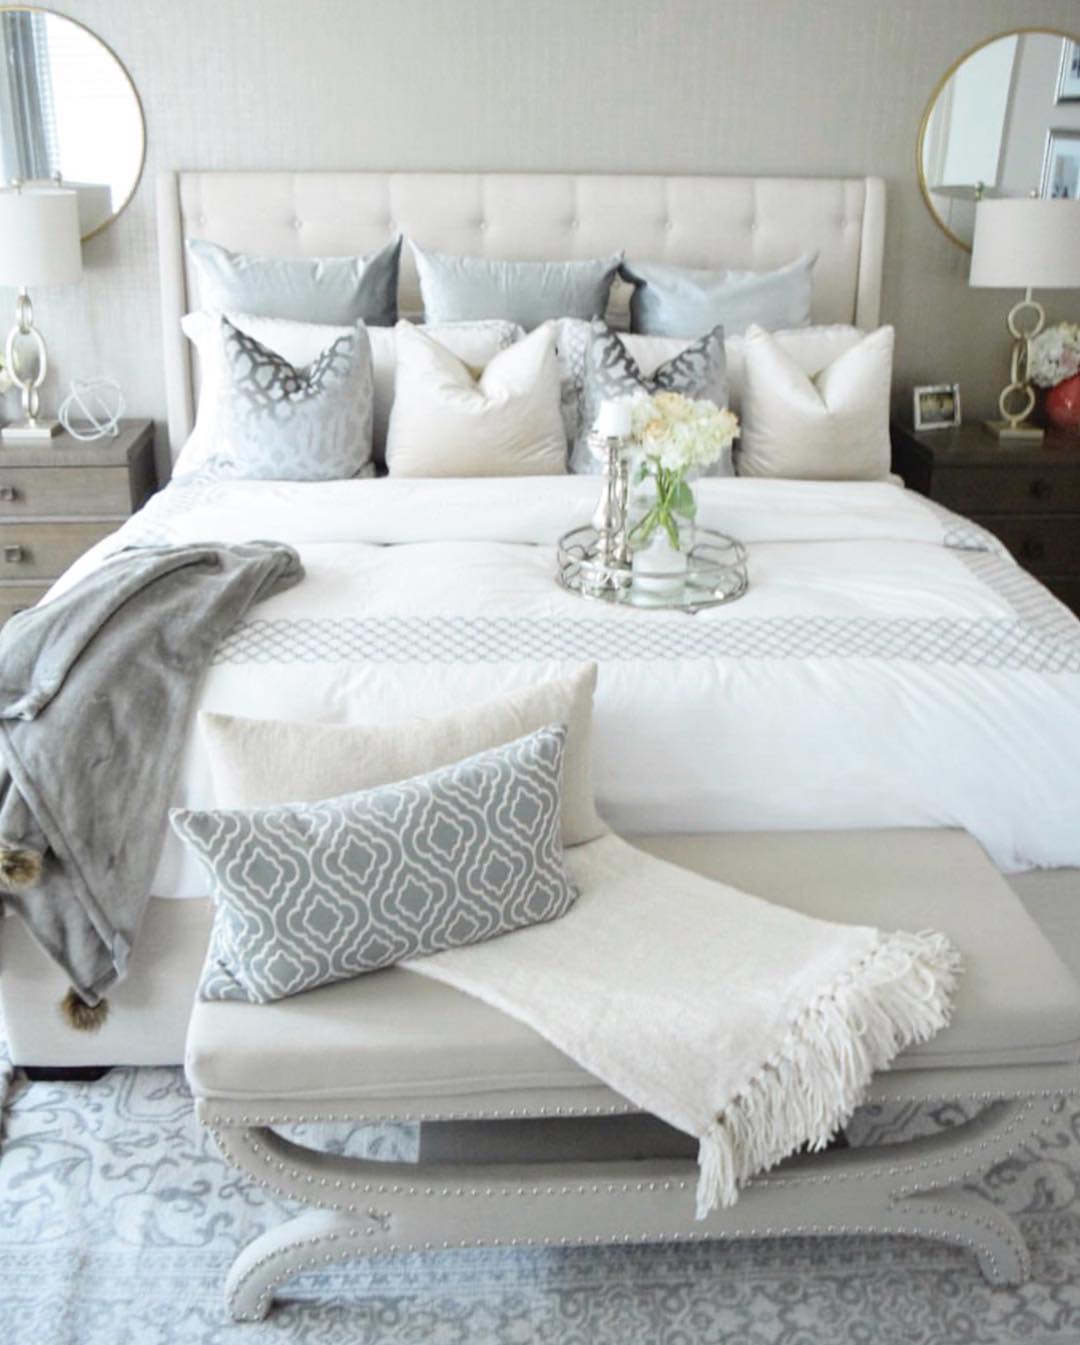 This is so so pretty master bedroom design. Pic by buildingourforever